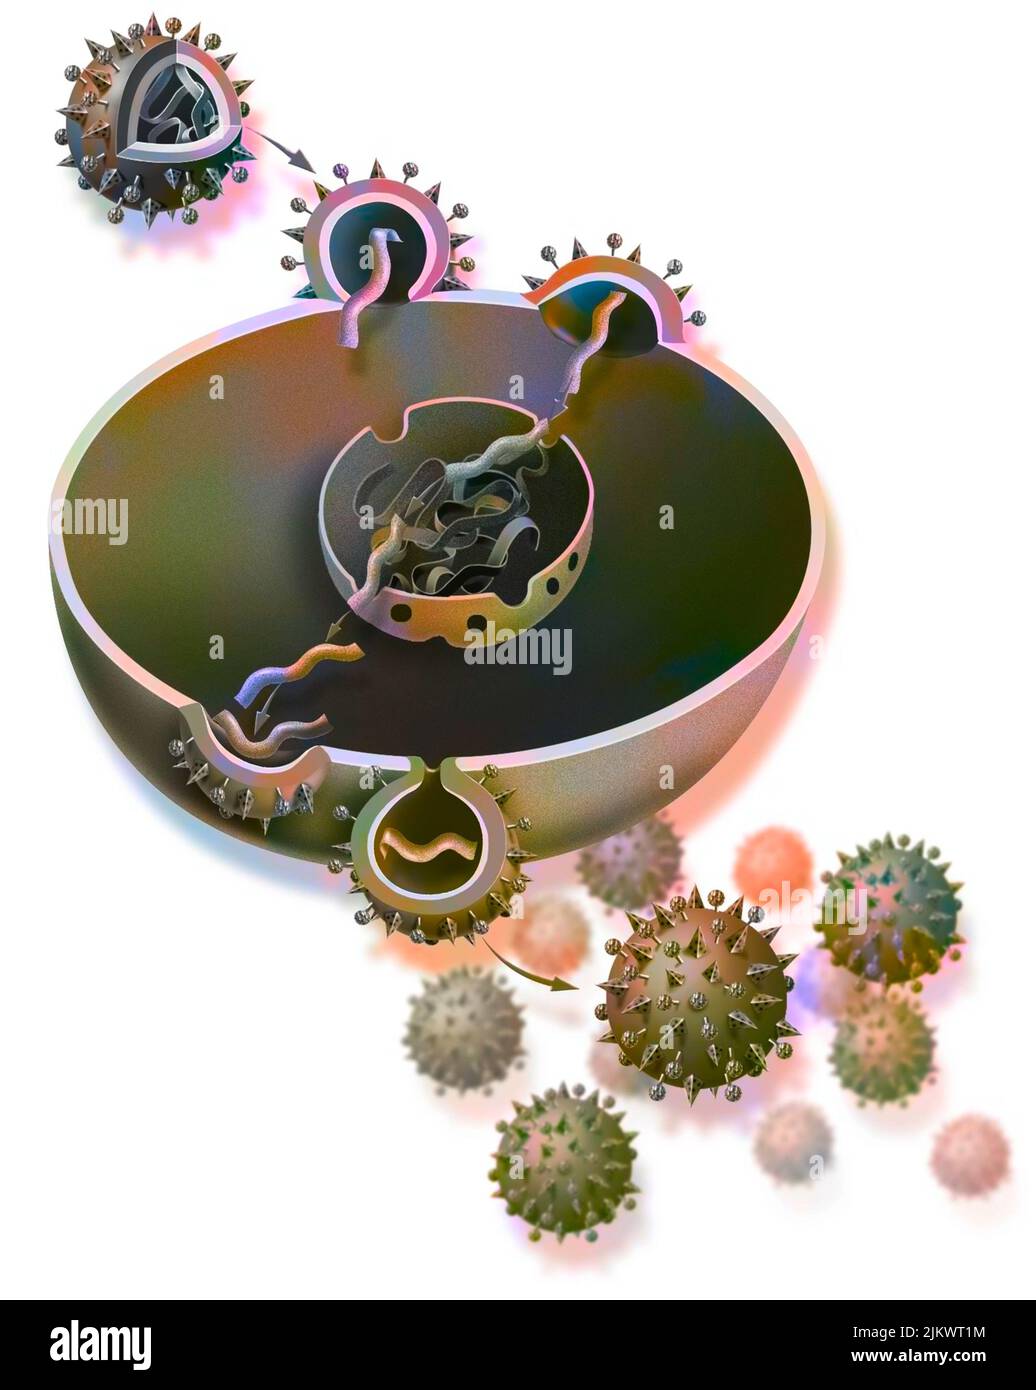 Replication of influenza virus from a host cell. Stock Photo